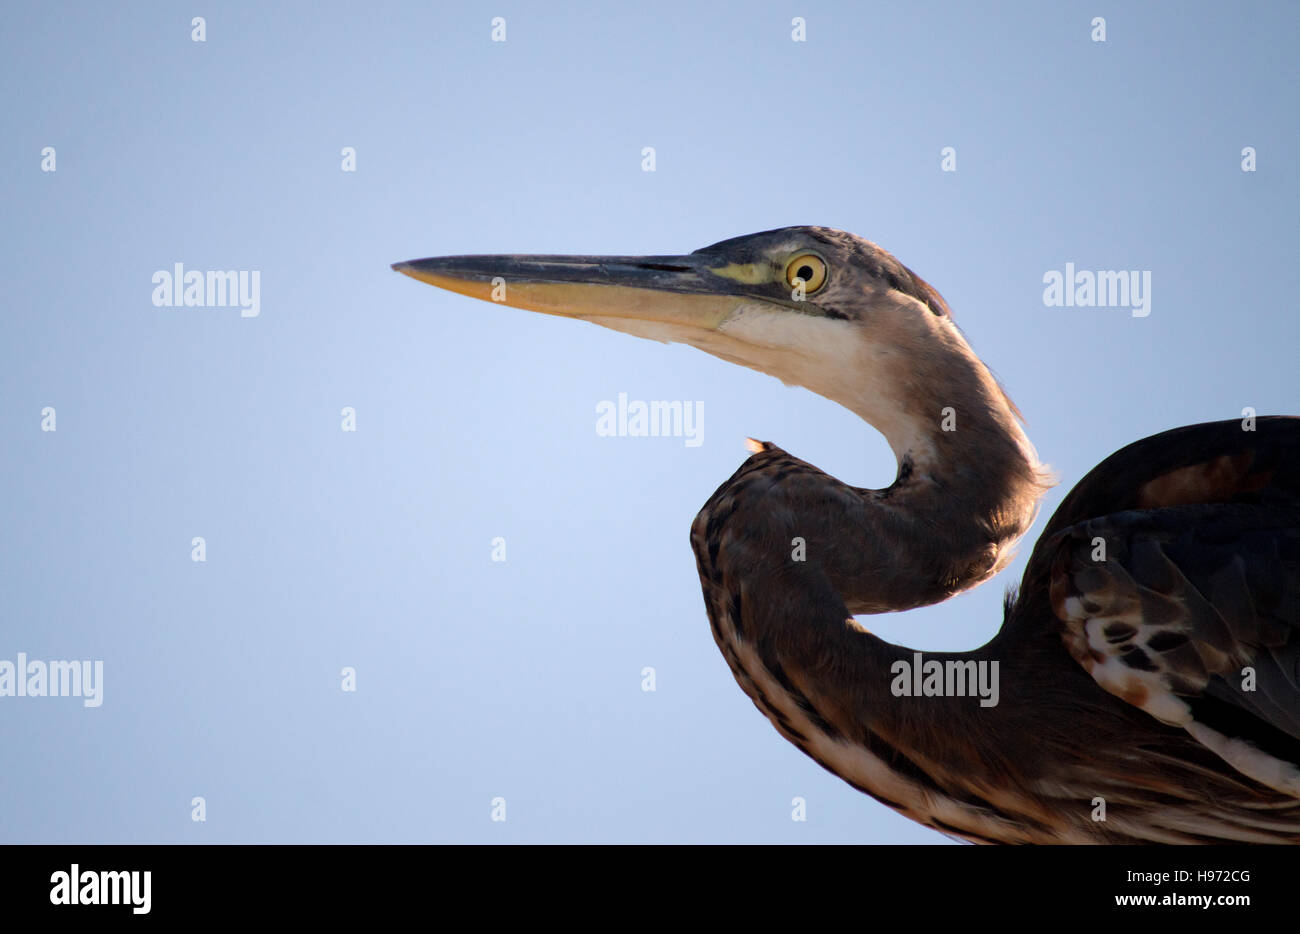 The head of gray heron with its neck bent in a s shape against the blue ...